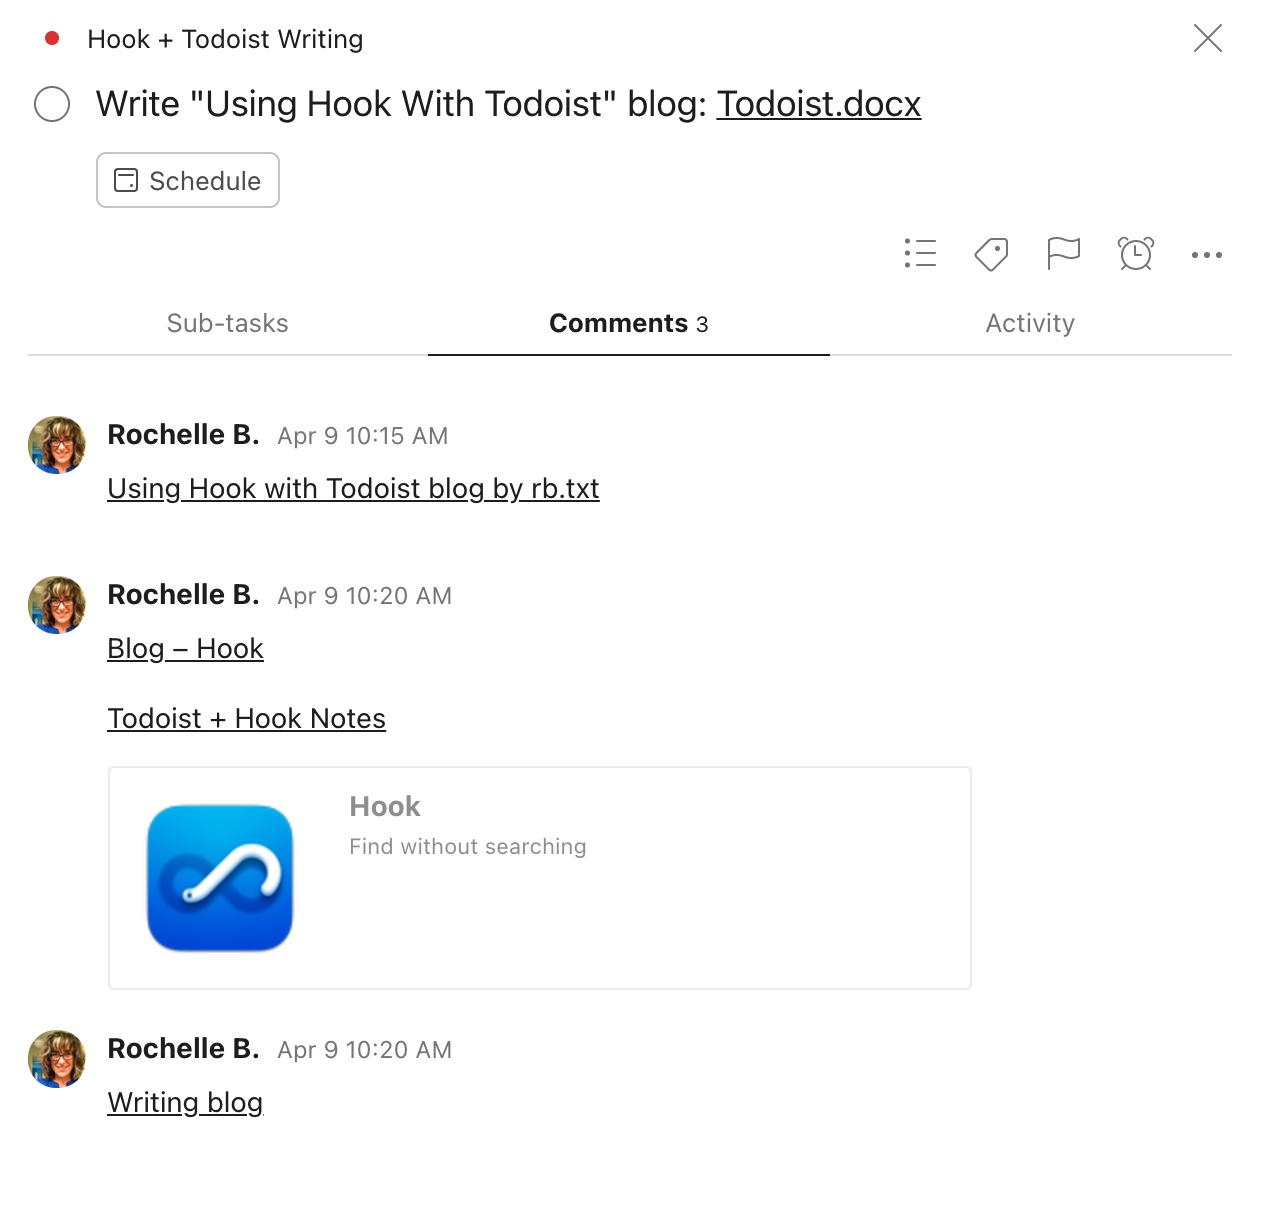 Todoist Task showing comments with several Hook-derived links.